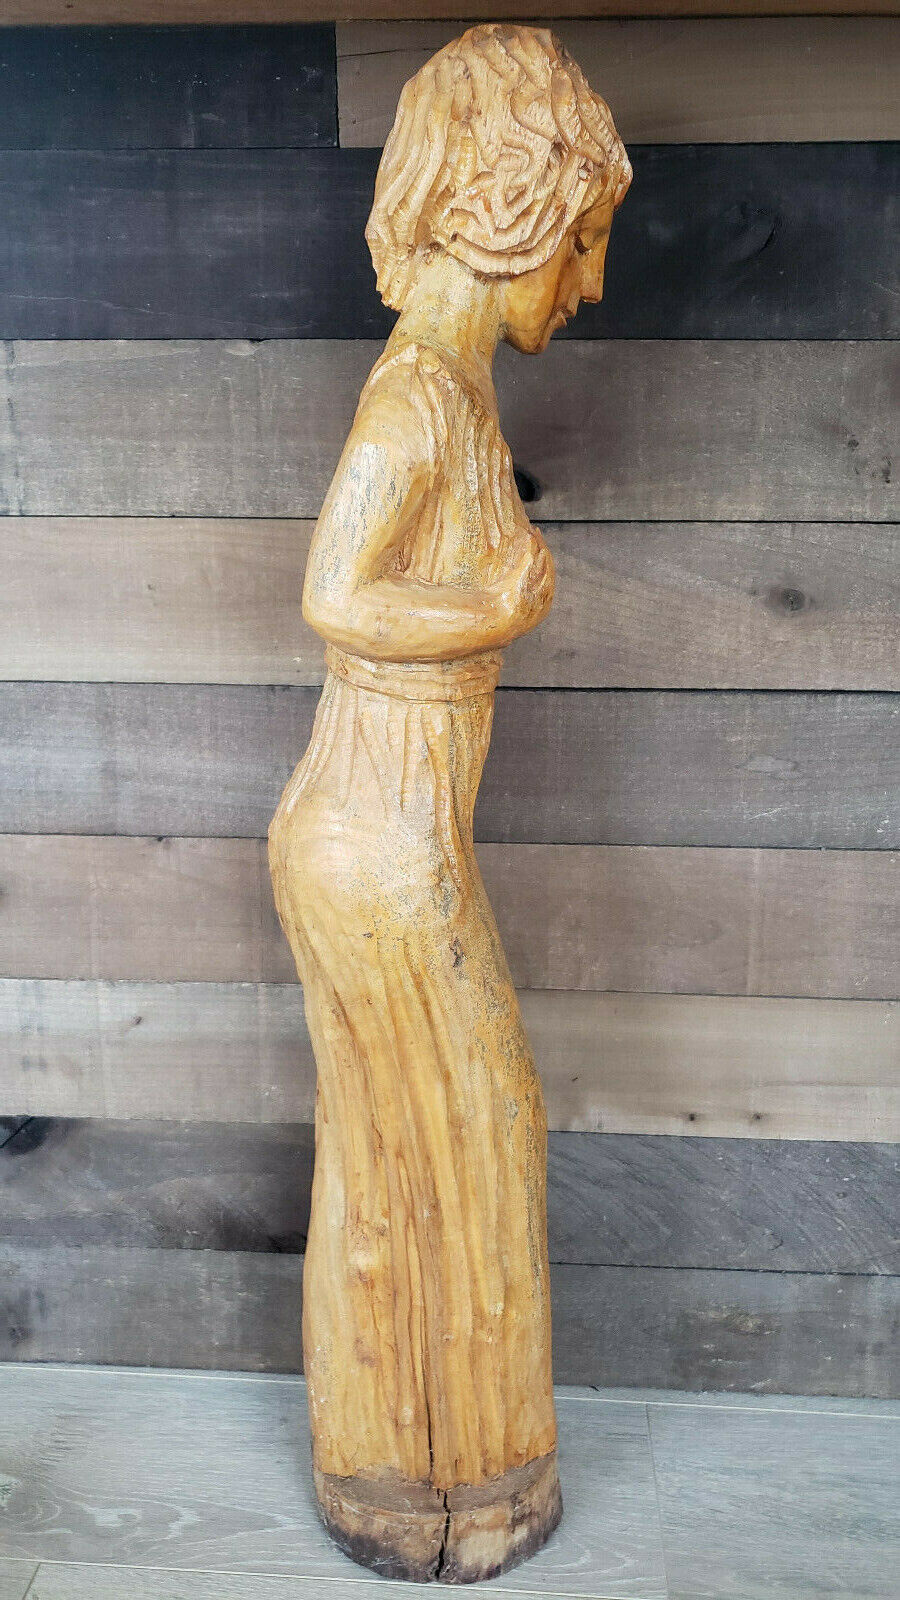 Rare Vintage Handcarved Wooden Statue of a Woman Holding Her Breast. 34" Без бренда - фотография #3